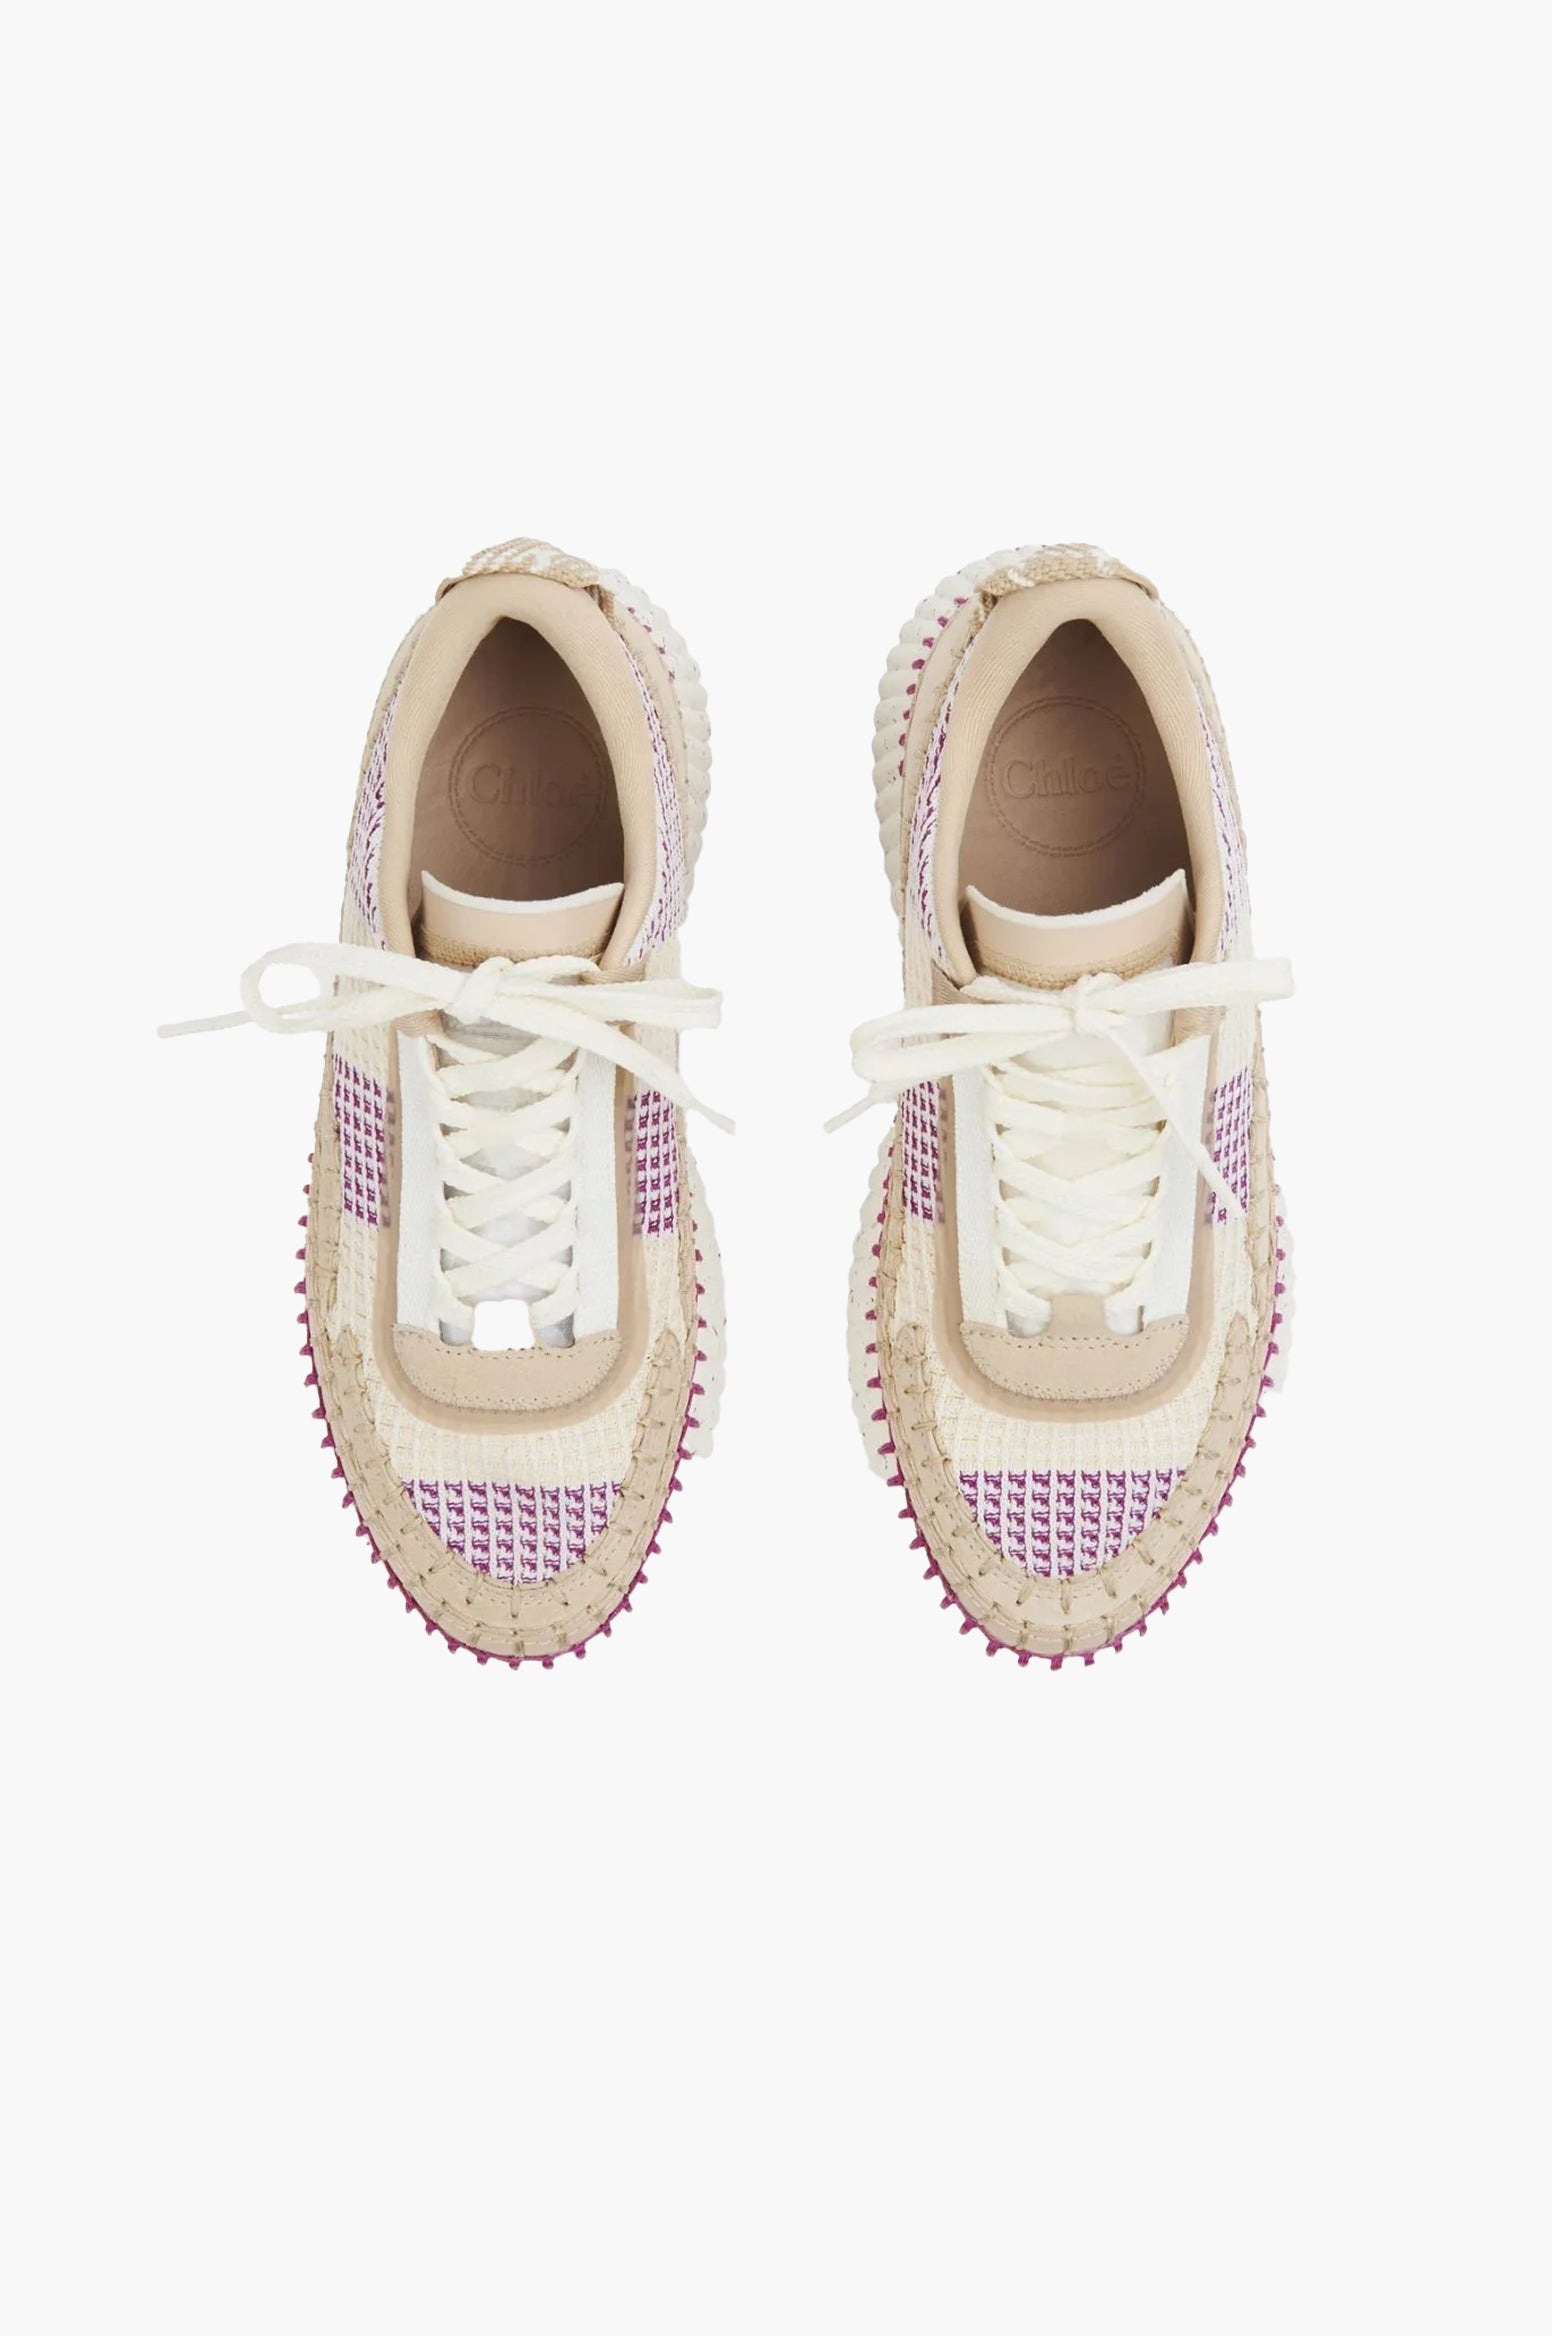 CHLOÉ Nama Sneaker in Wild Purple available at The New Trend Australia